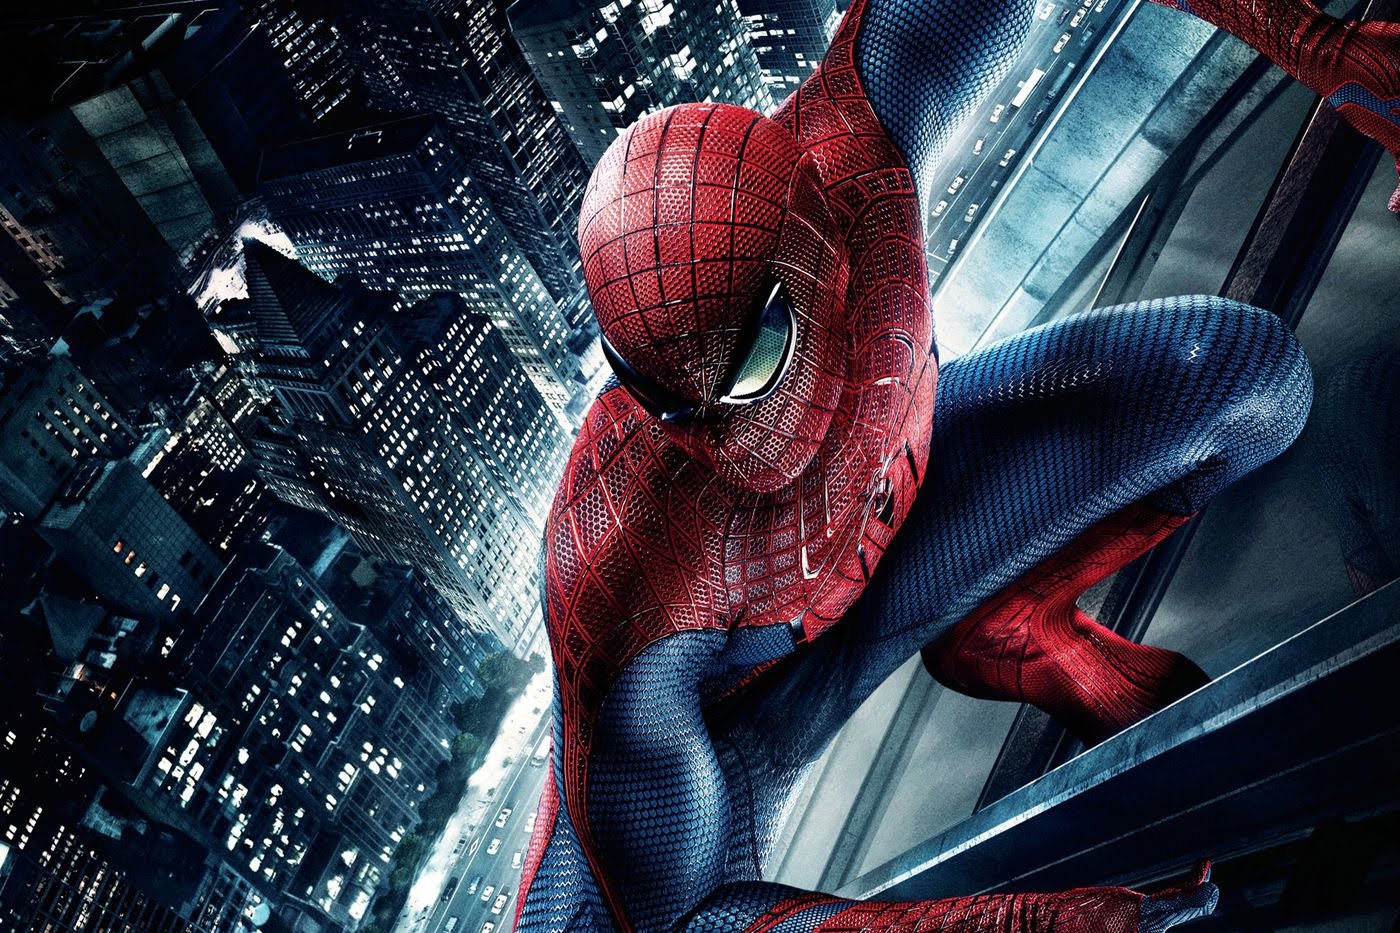 The original Sony-Marvel deal let Sony produce the movies which Marvel was creatively involved in it. Pic courtesy: theverge.com 